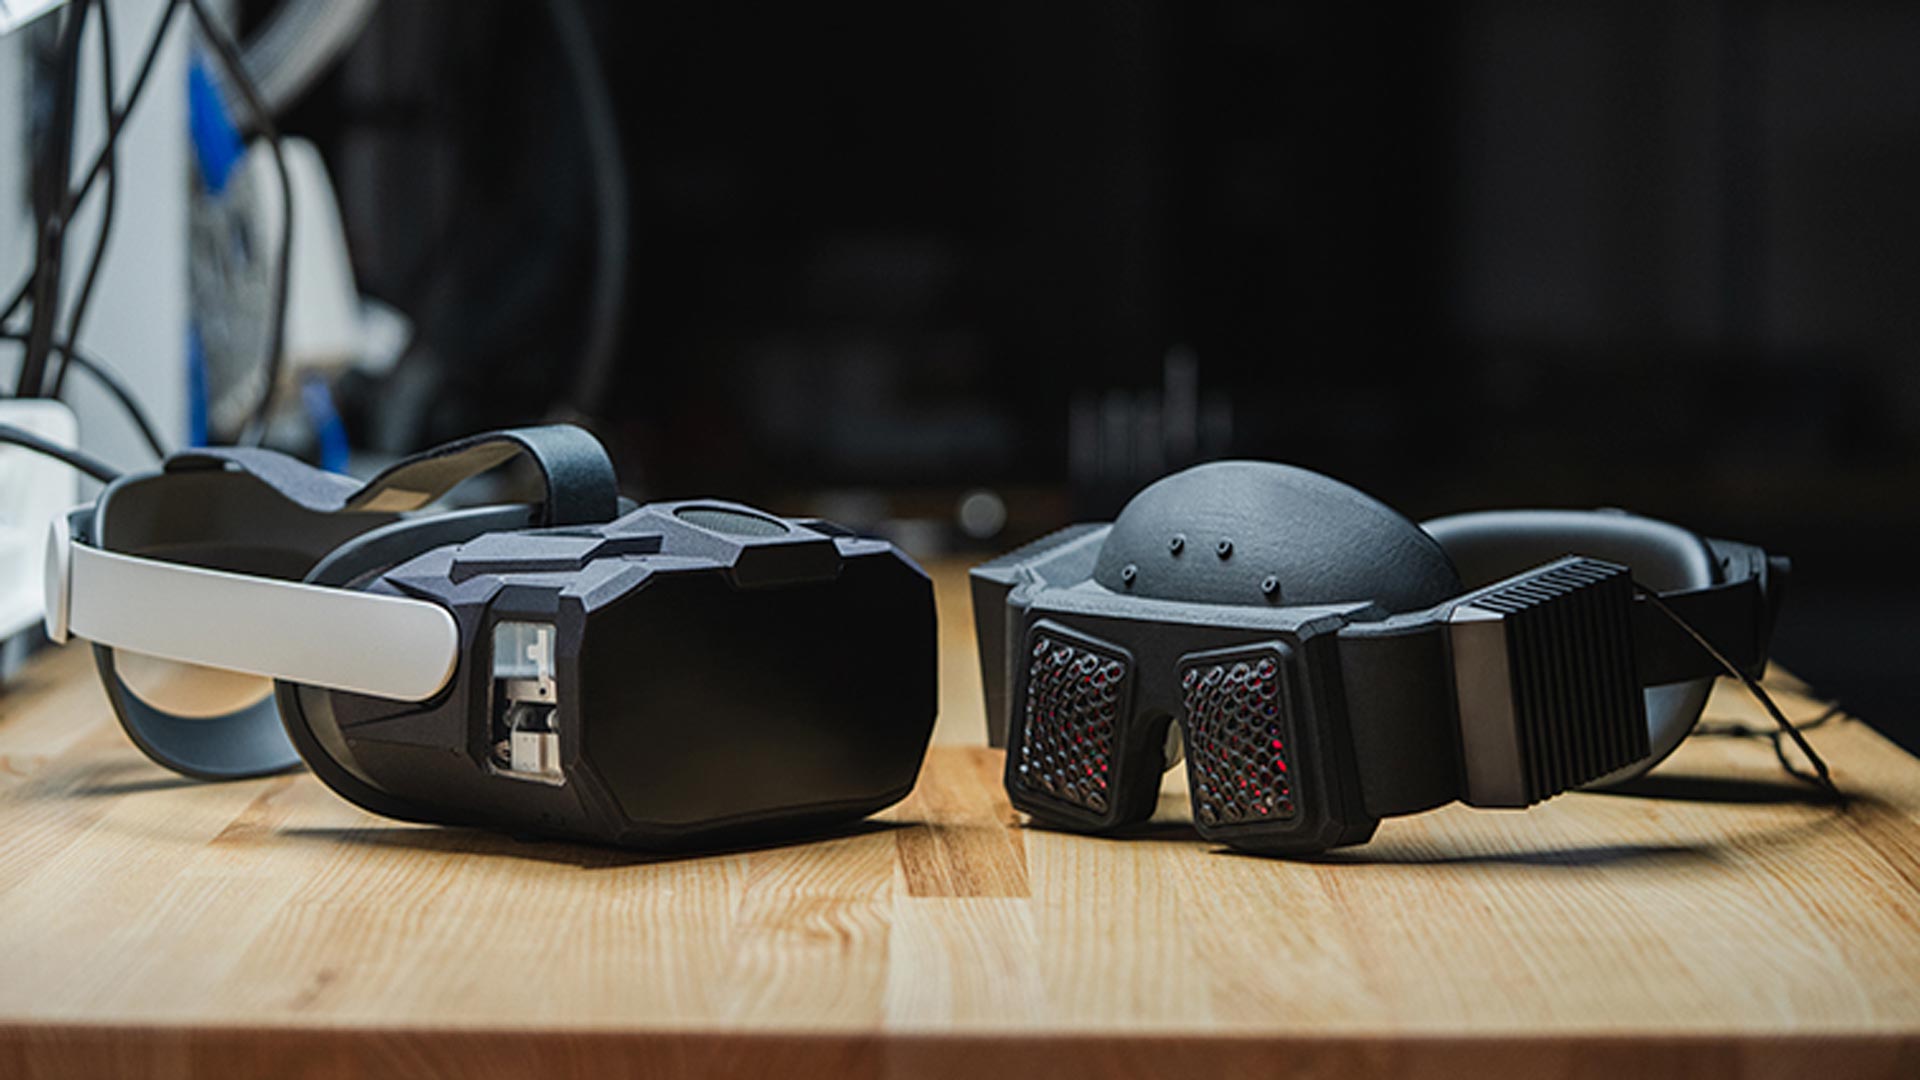 Meta Reveals New Prototype VR Headsets Focused on Retinal Resolution and Light Field Passthrough – Road to VR